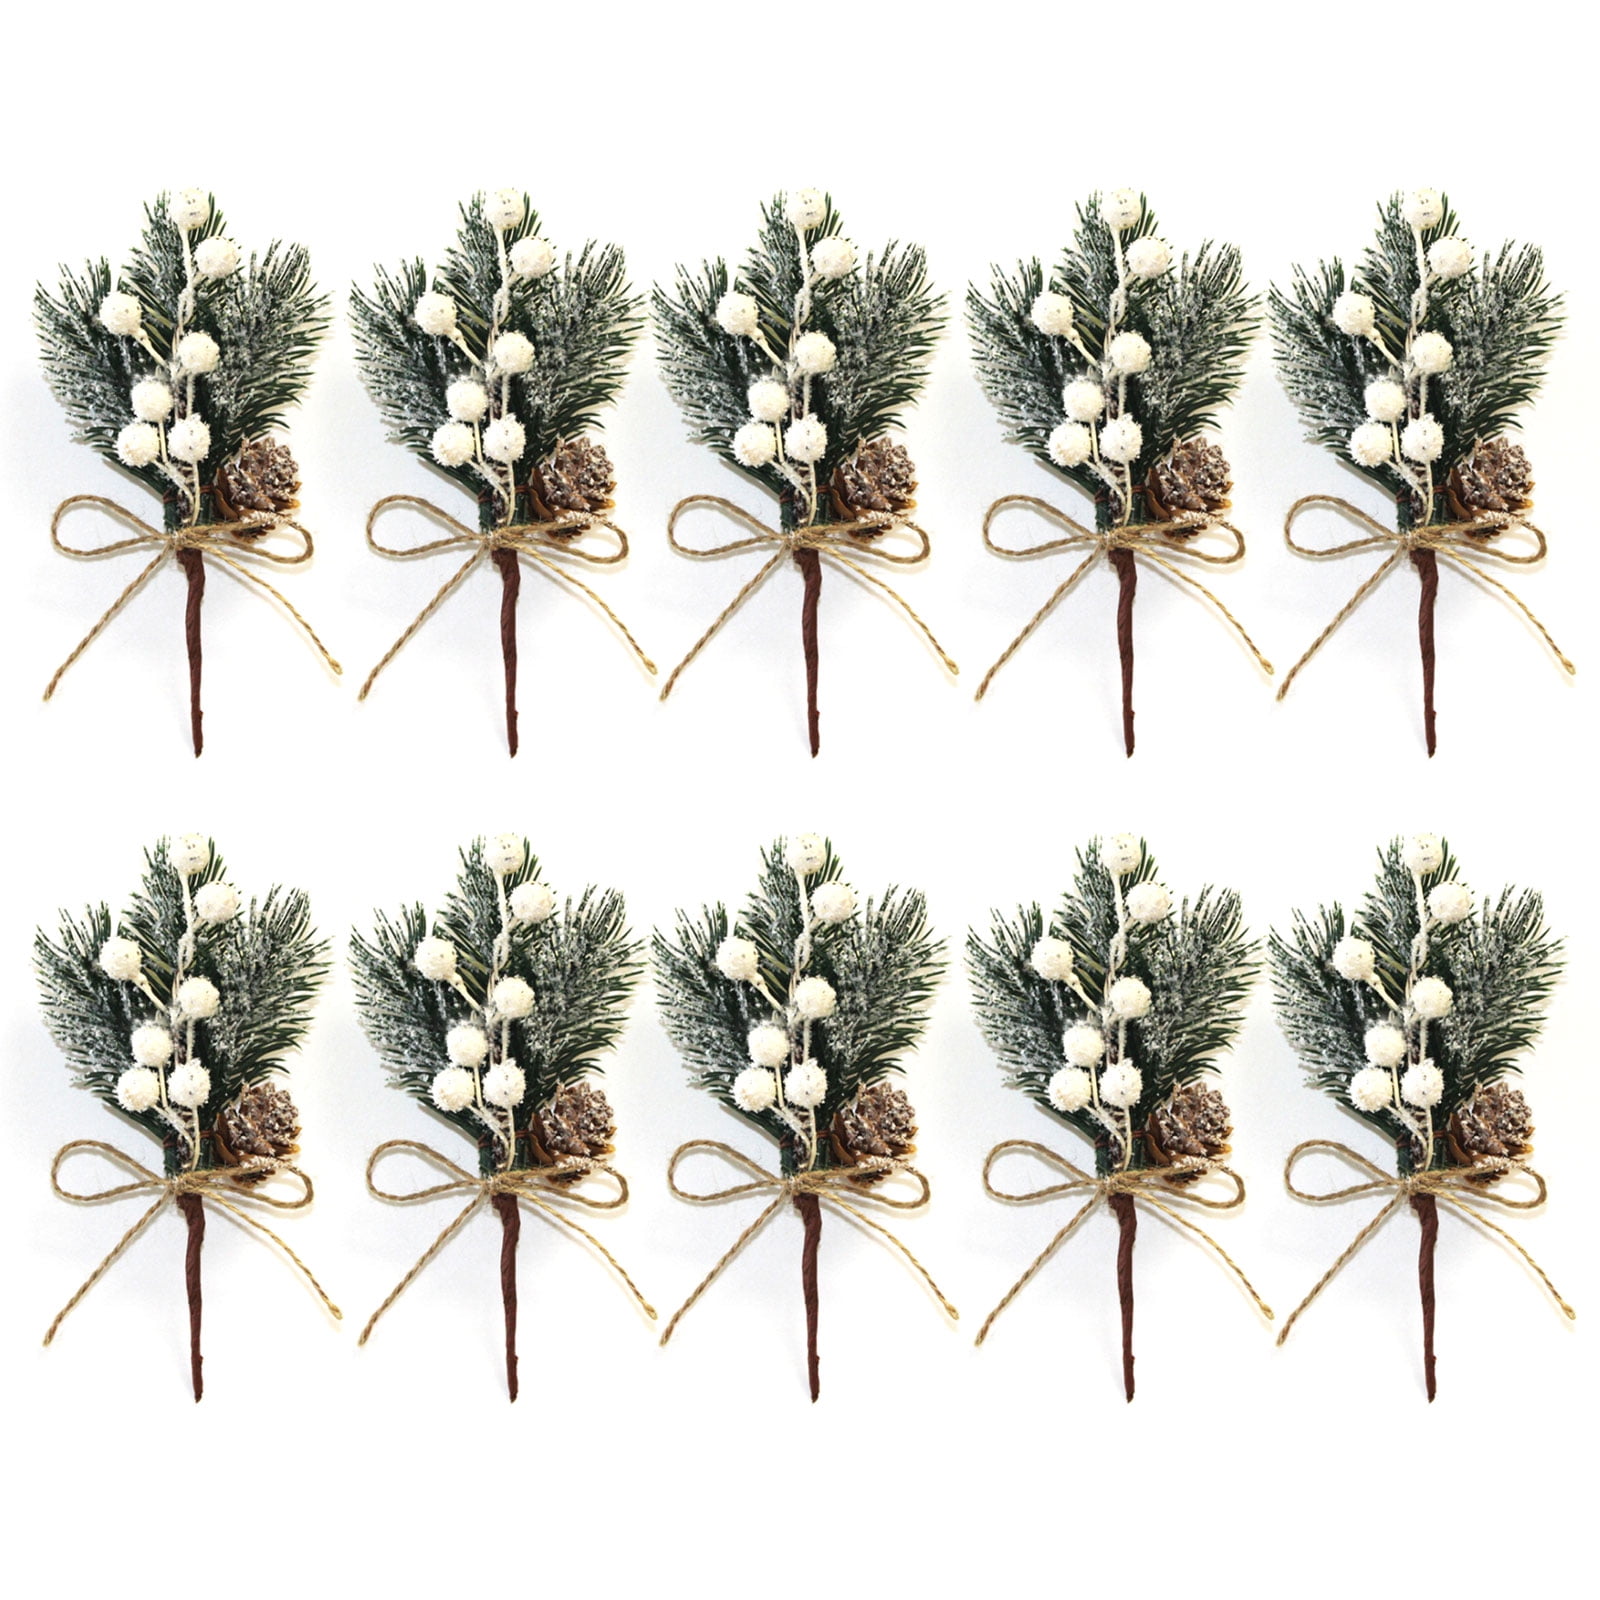 Details about   Pick XMAS Decor Artificial Pine Branch Cone Berry Holly Flower 10x Christmas 